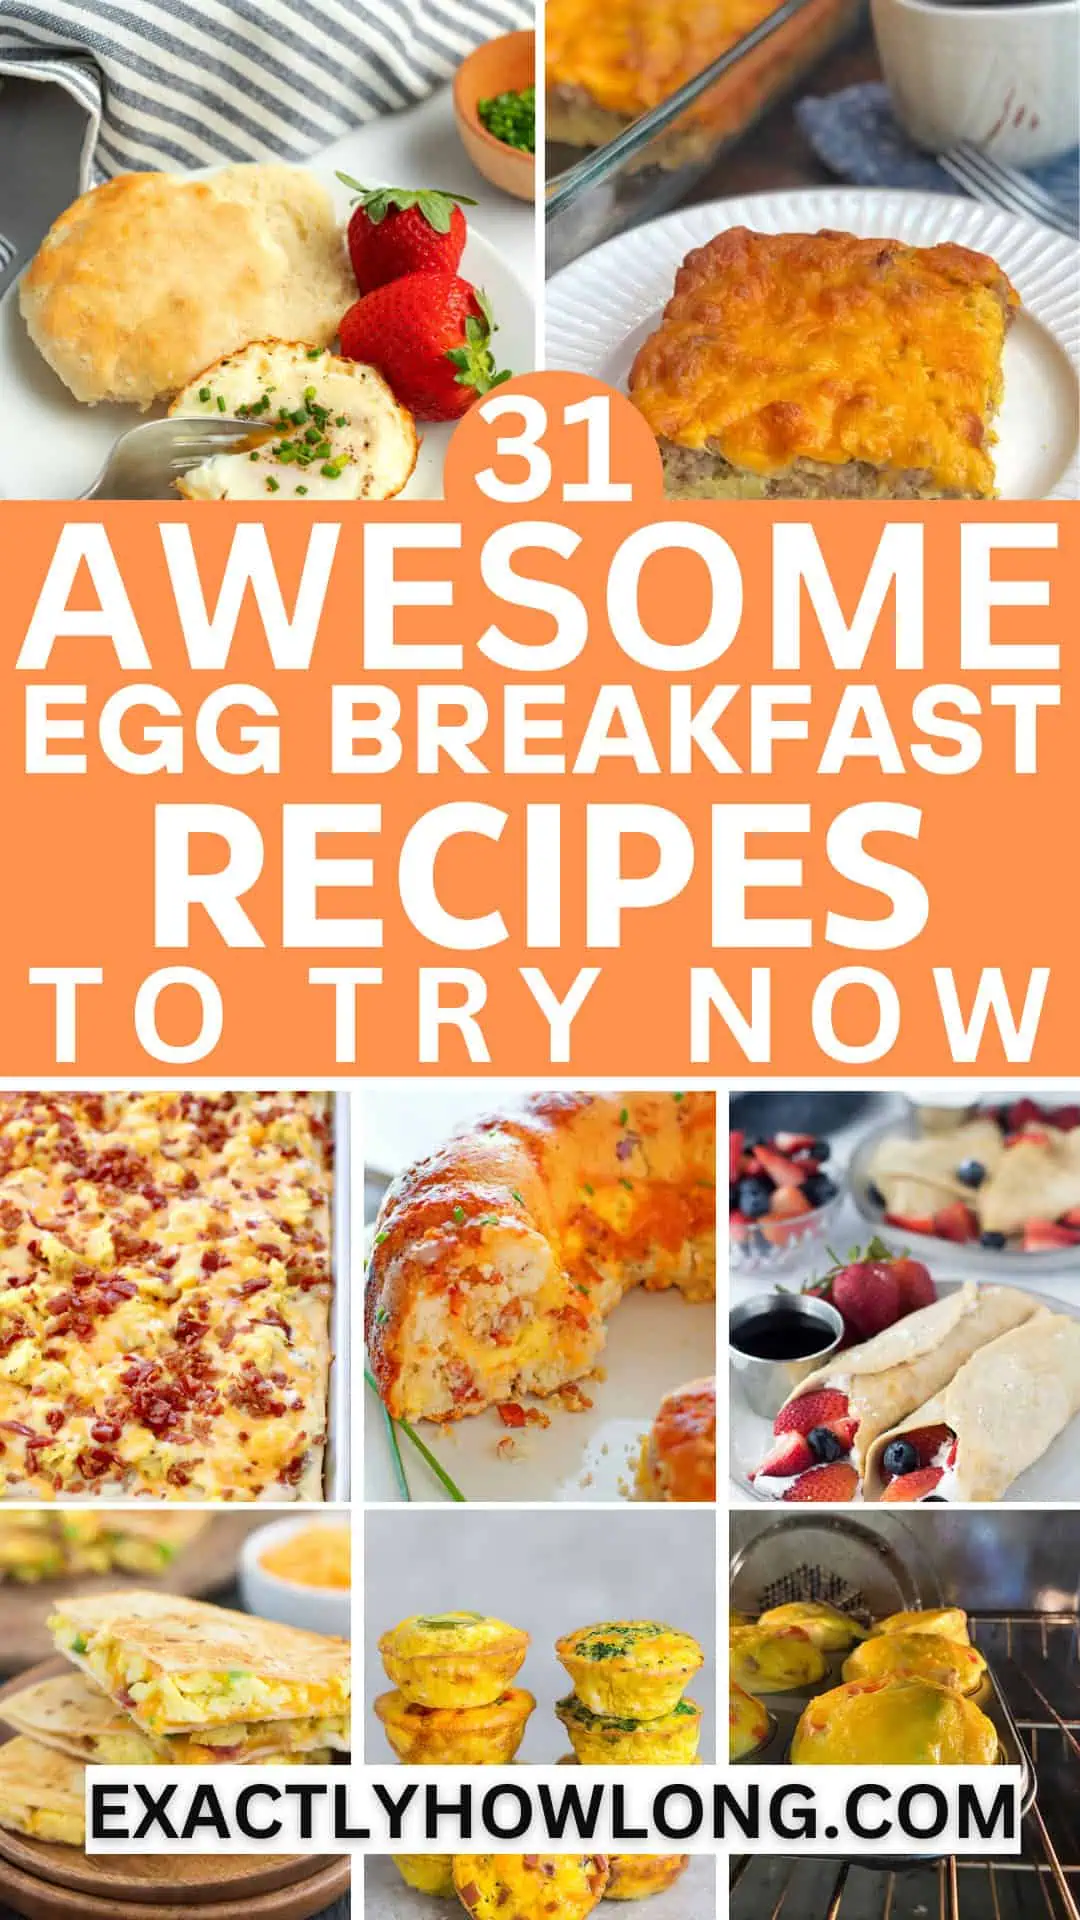 Family-friendly breakfast recipes that are healthy, easy, and quick to make with eggs